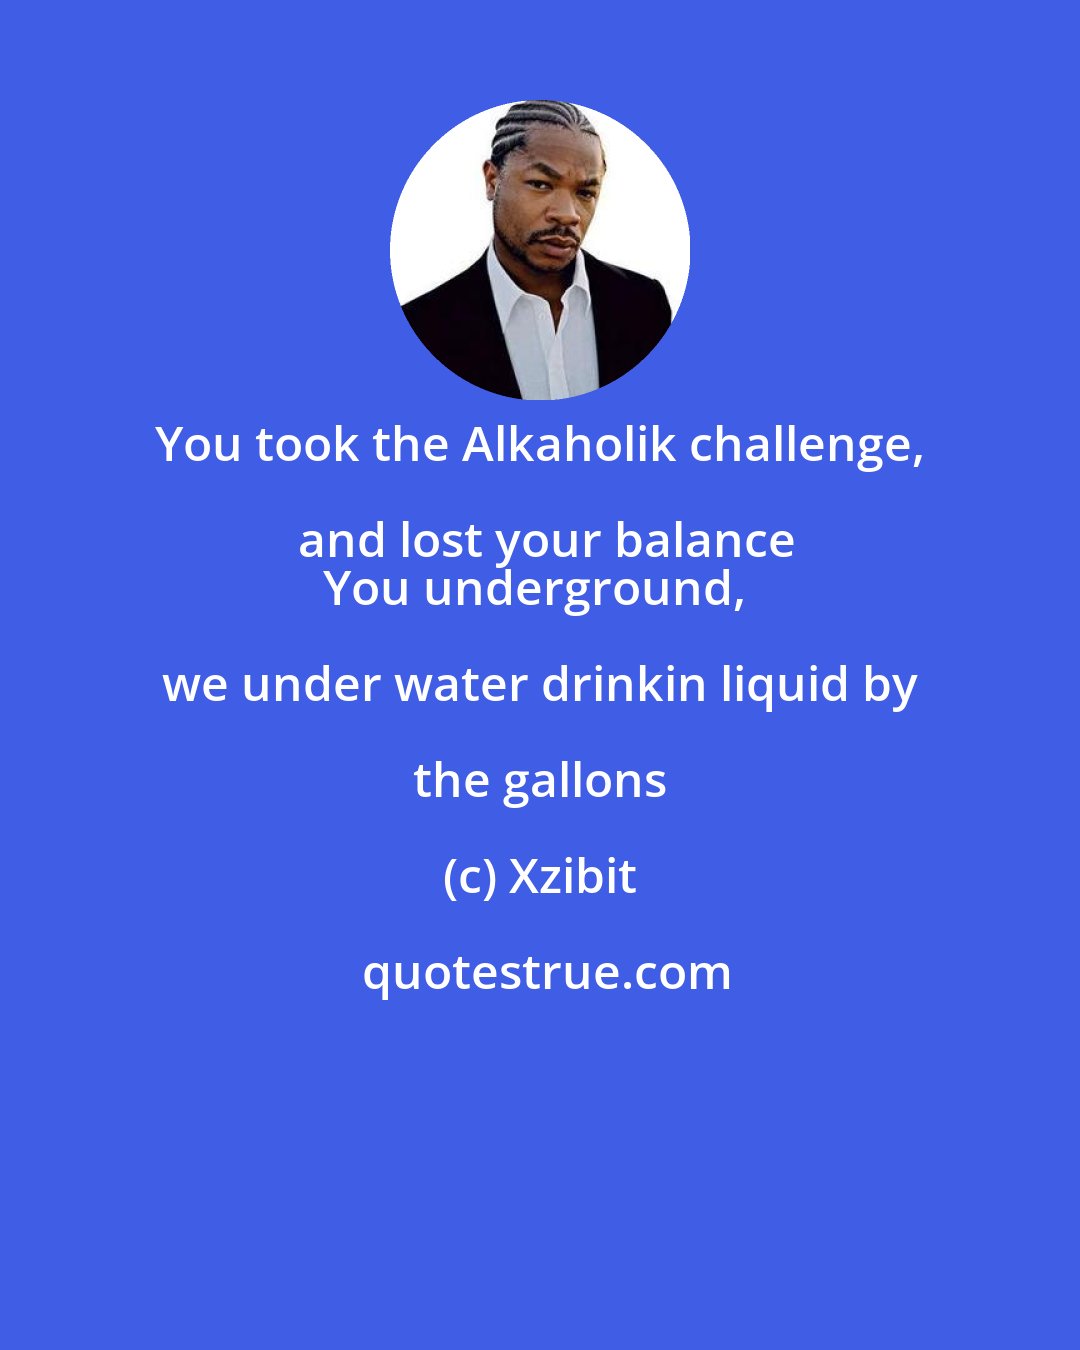 Xzibit: You took the Alkaholik challenge, and lost your balance
You underground, we under water drinkin liquid by the gallons